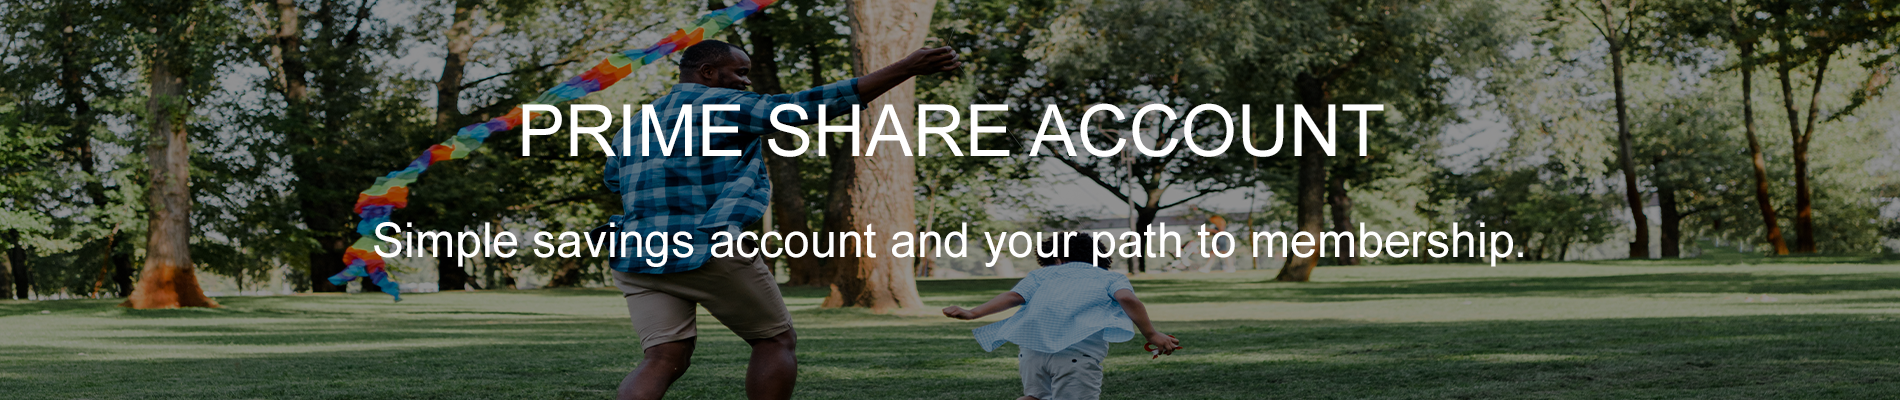 Prime Share Account